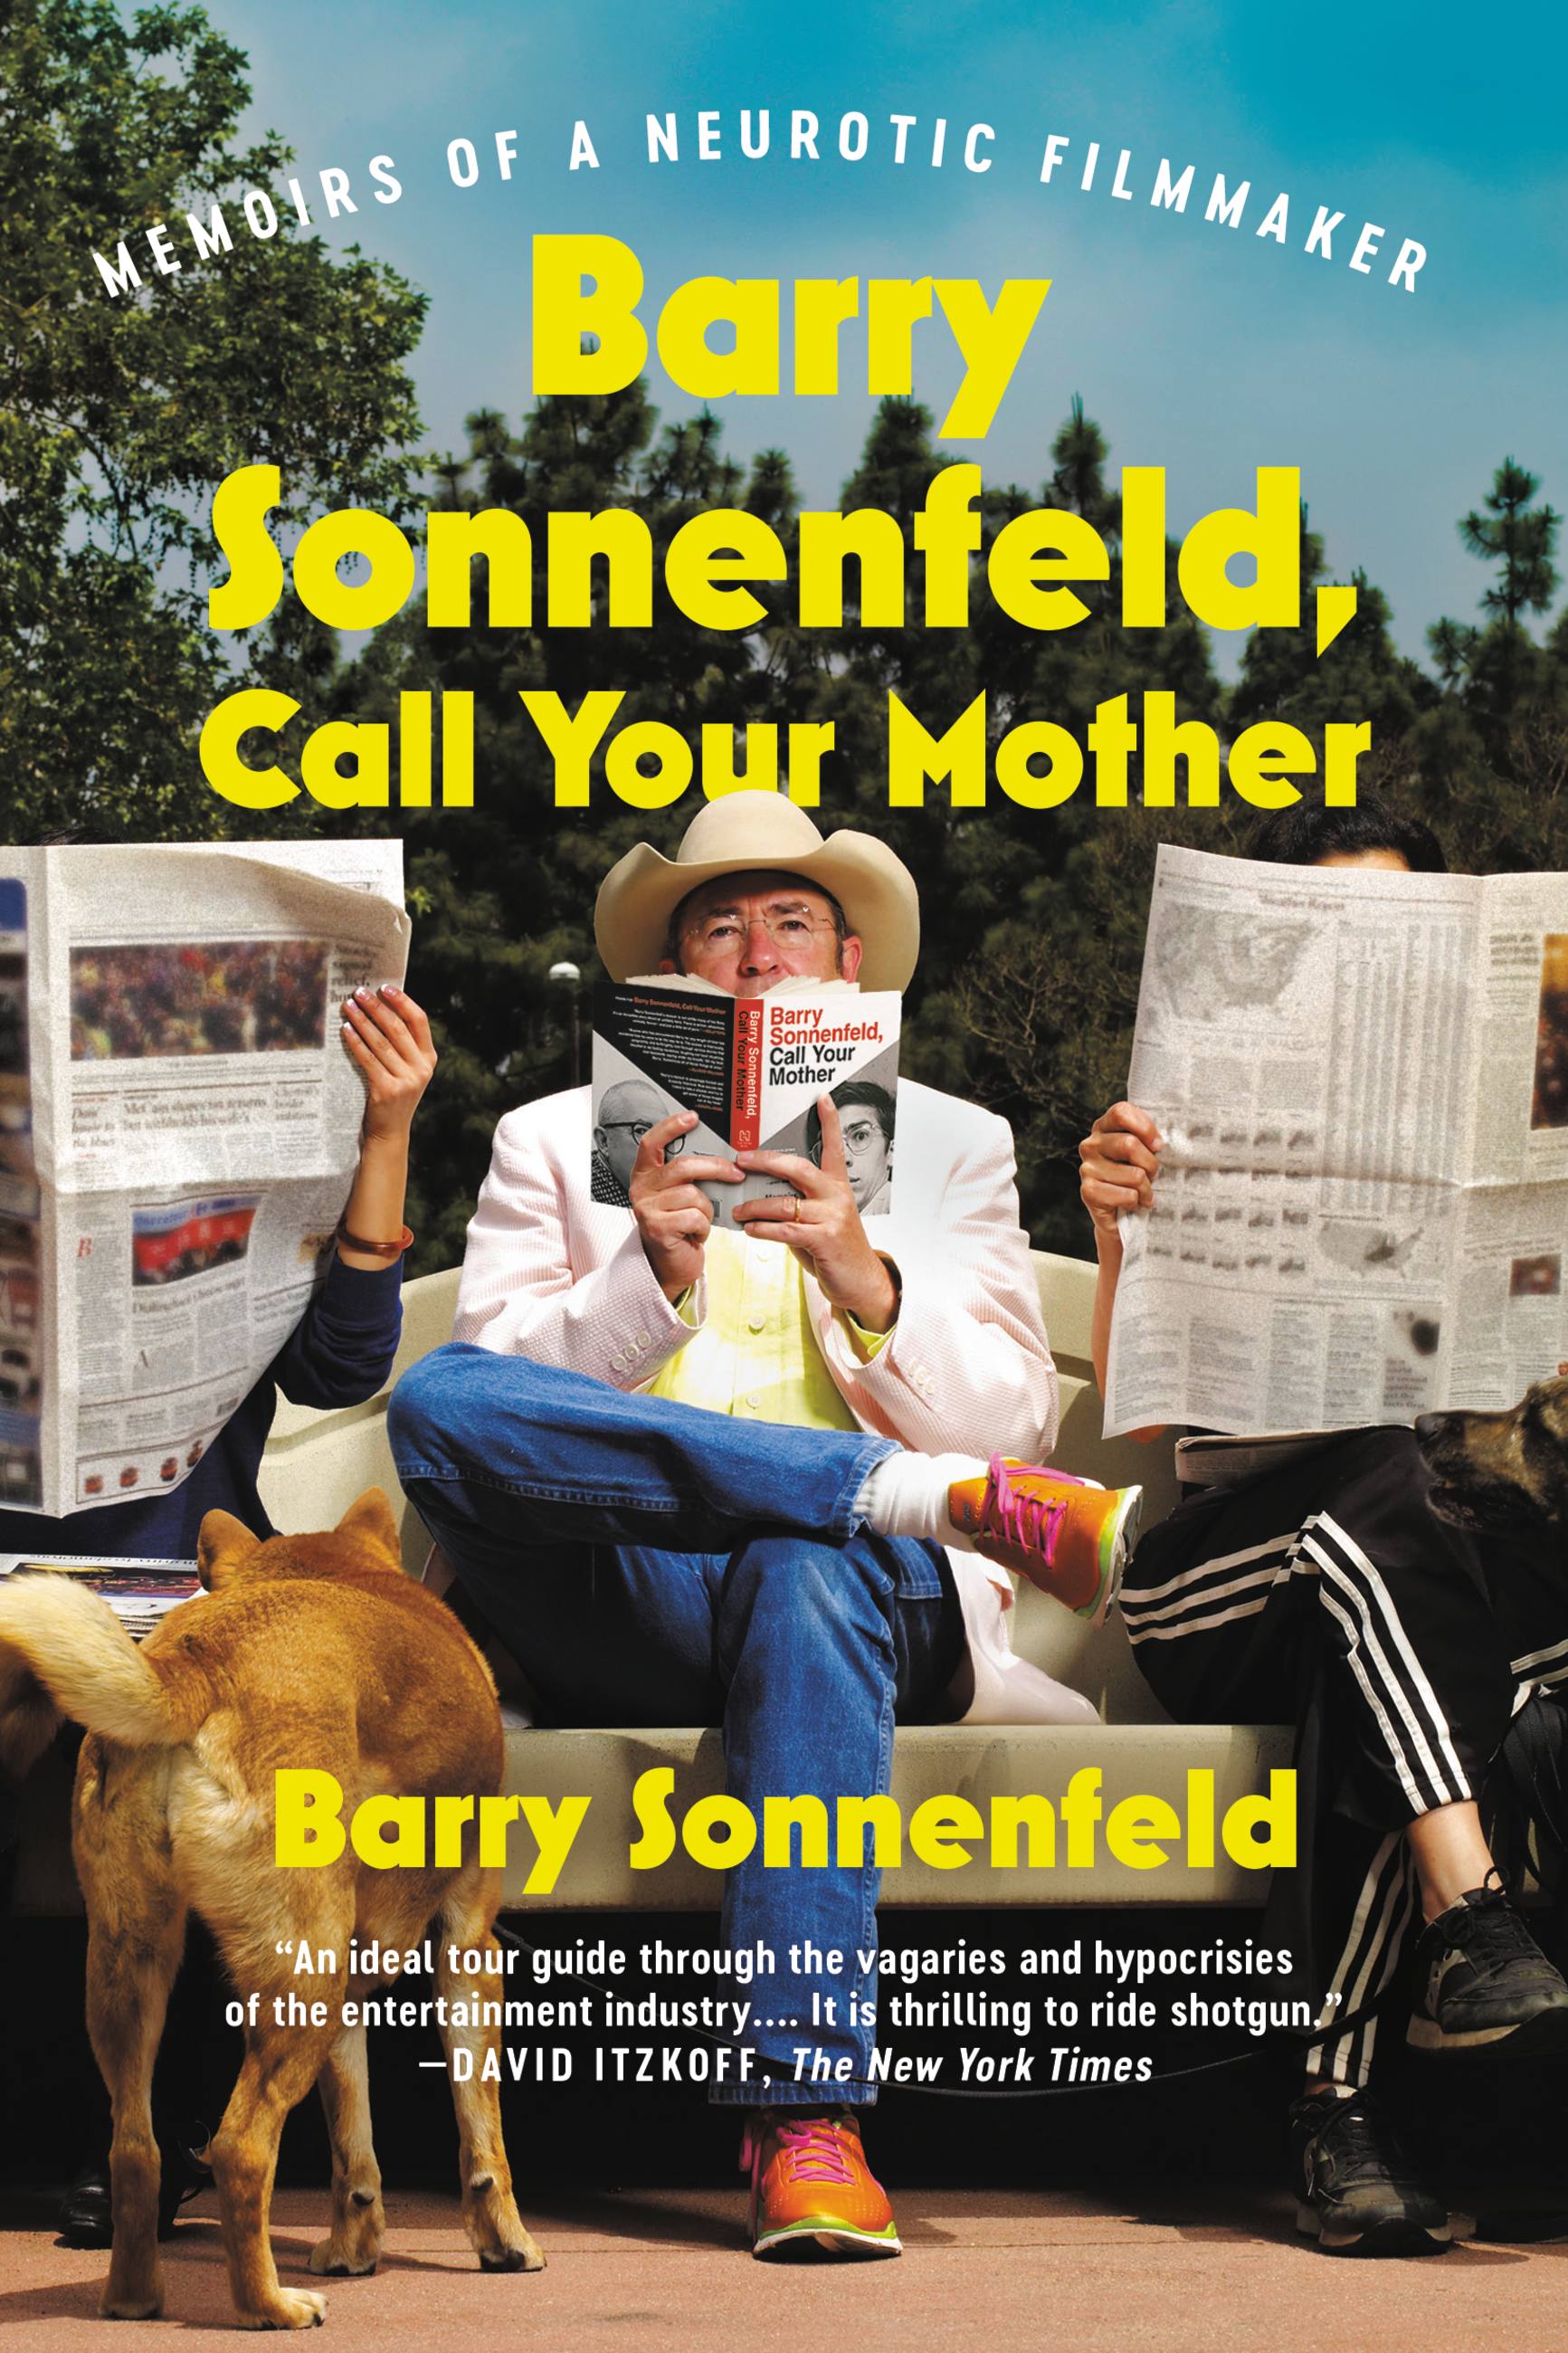 Salesman Forced Mp4 - Barry Sonnenfeld, Call Your Mother by Barry Sonnenfeld | Hachette Book Group